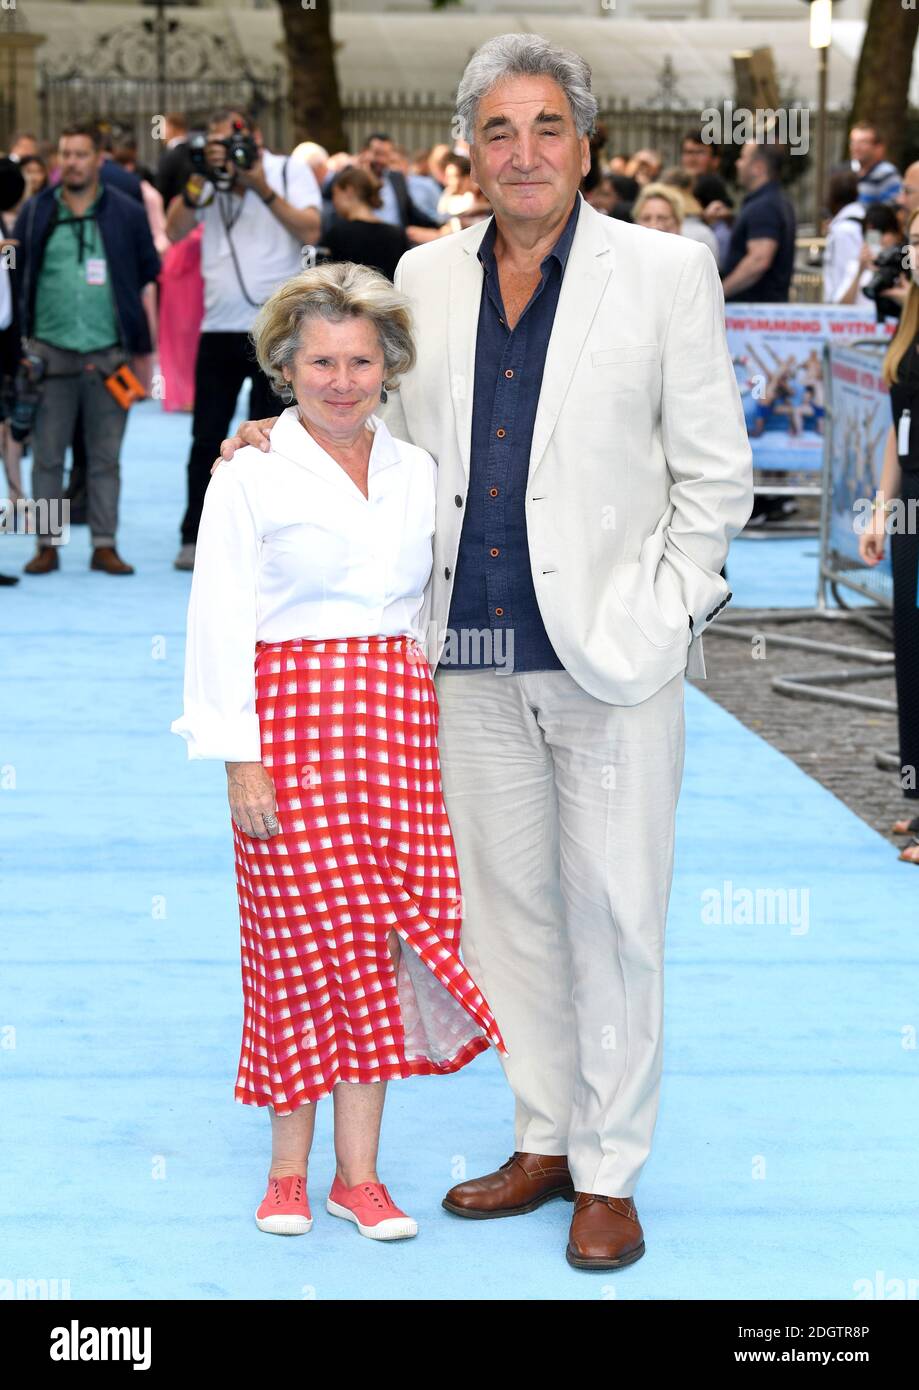 Imelda Staunton and Jim Carter attending the Swimming with Men premiere ...